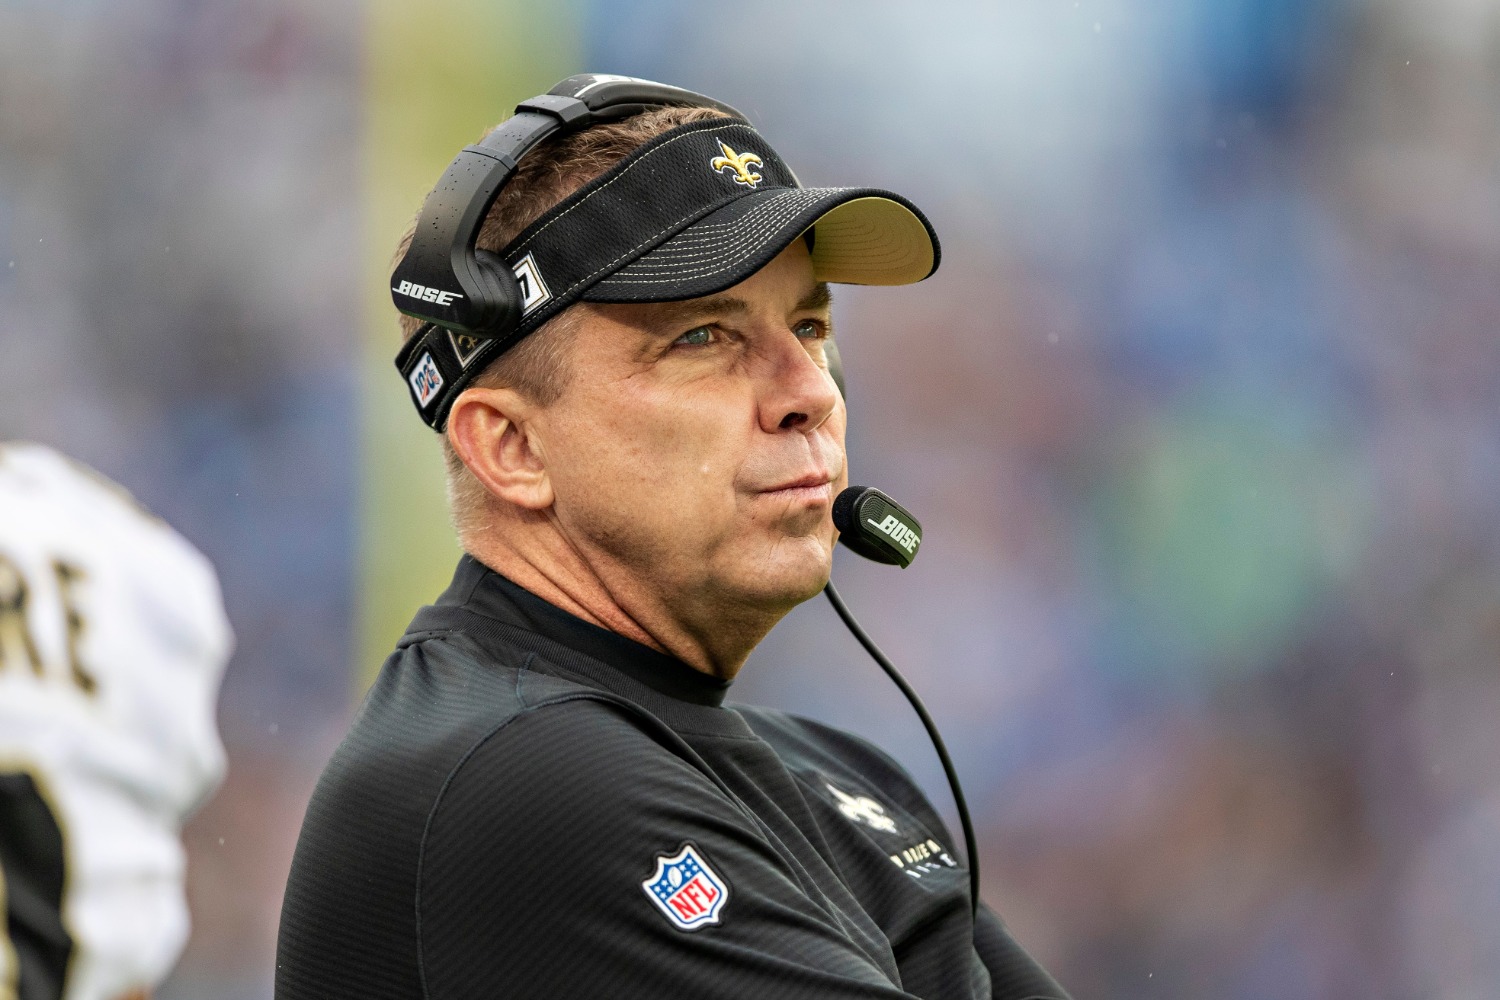 Saints head coach Sean Payton came up with a creative idea to send a message about the Jacob Blake shooting.